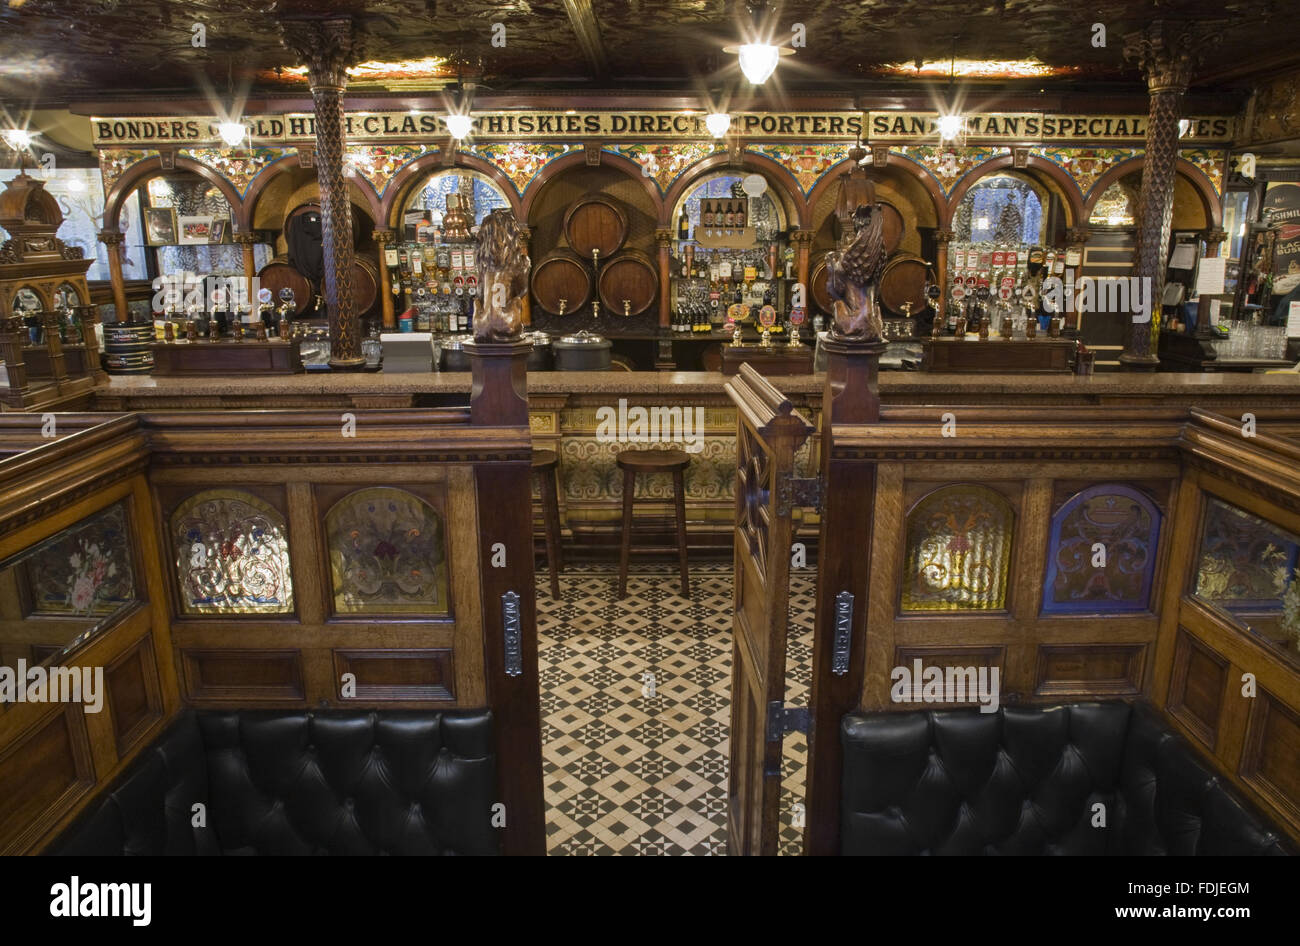 View from one of the wooden snugs towards the bar at The Crown Bar, Great Victoria Street, Belfast. Formerly known as the Crown Liquor Saloon, the pub building dates from 1826 but the wonderful late Victorian craftsmanship of the tiling, glass and woodwor Stock Photo